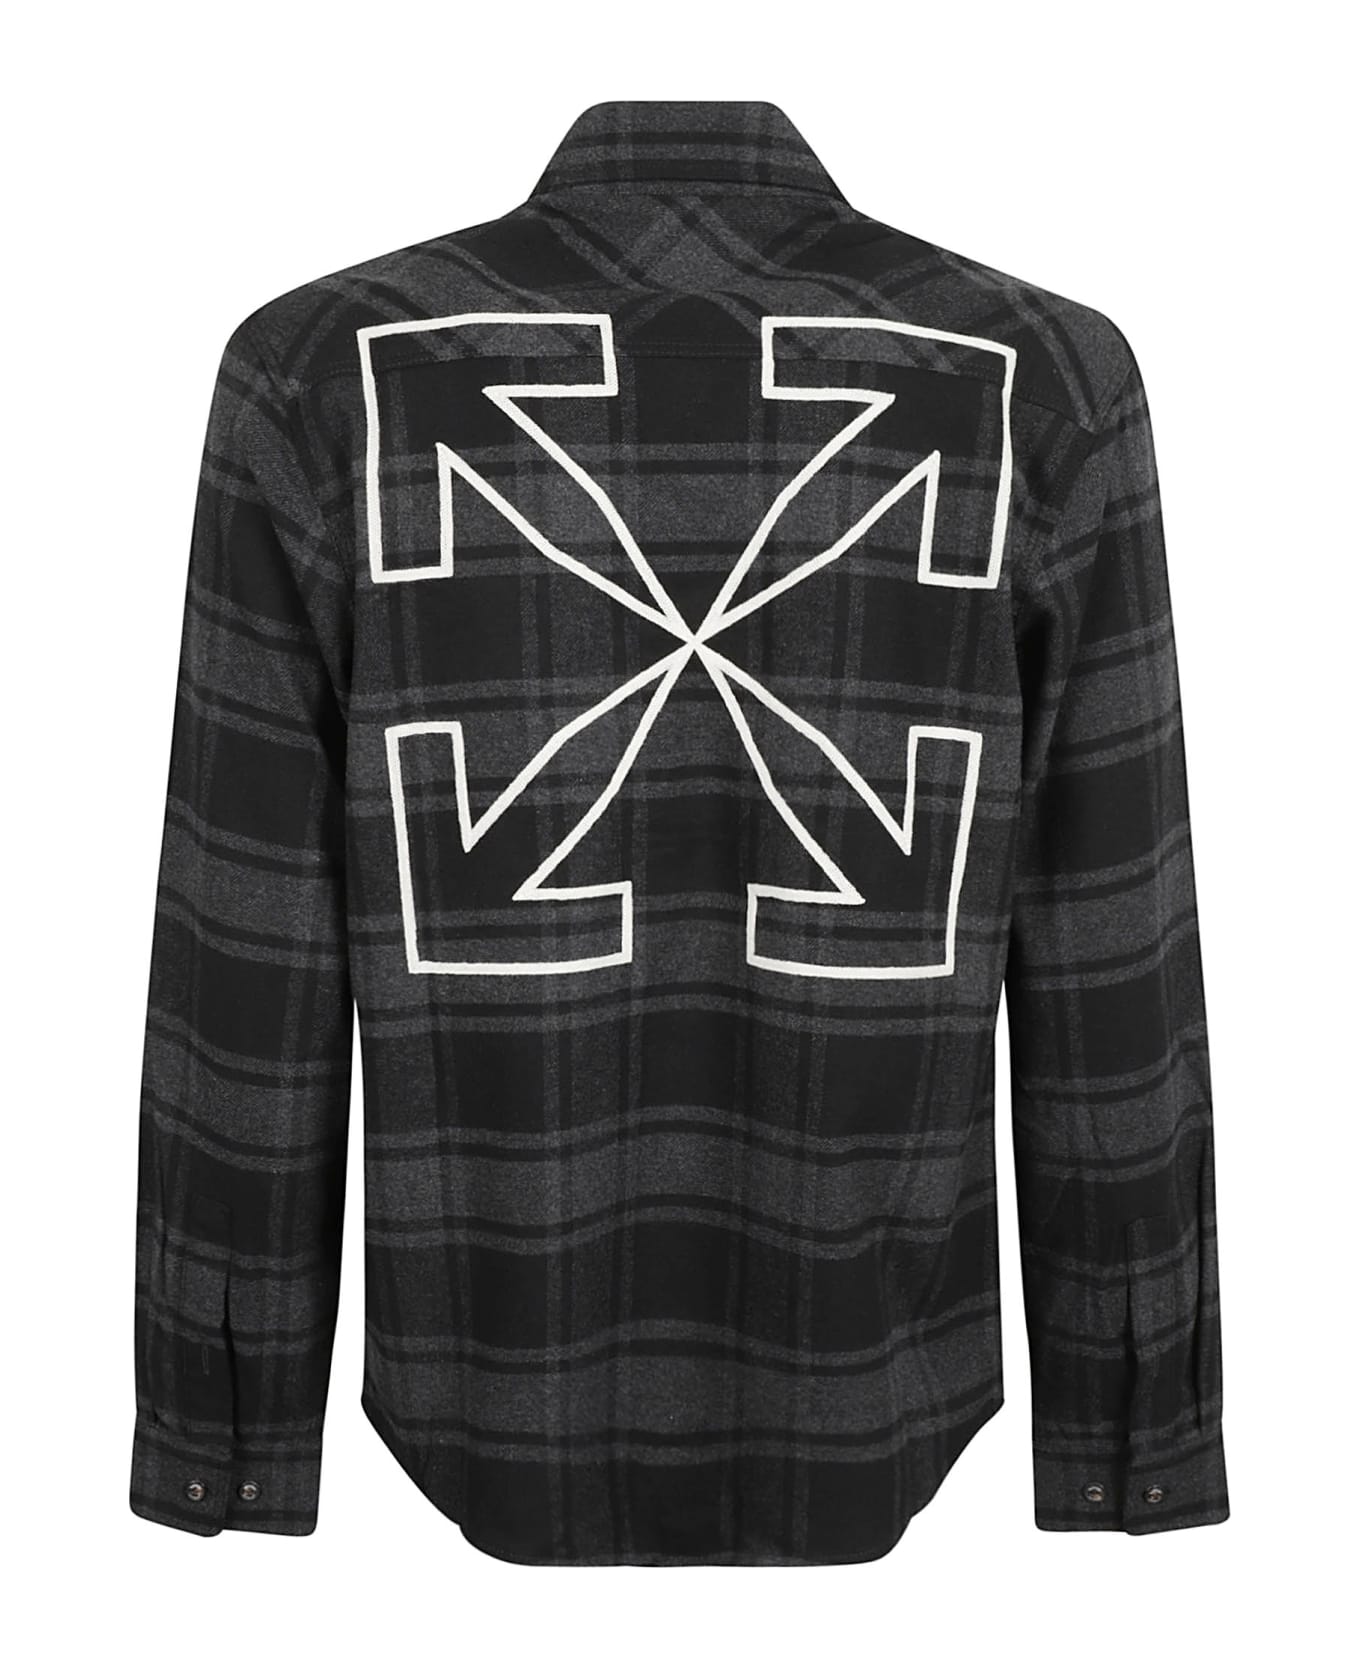 Off-White Outline Arrow Flannel Shirt - Grey/White